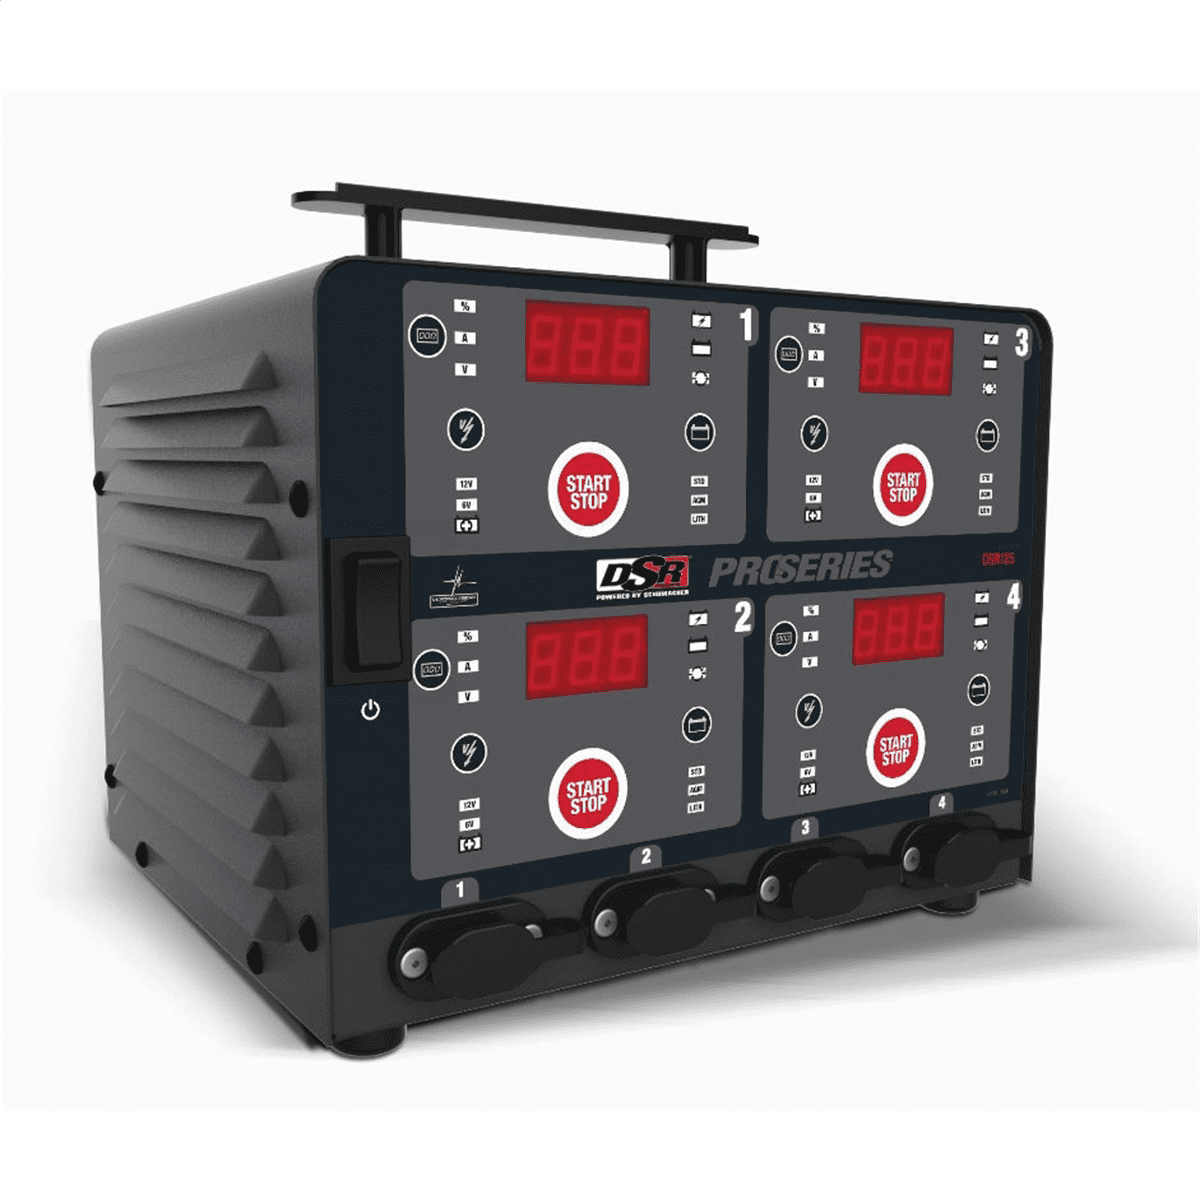 ProSeries 10A Quad-Bank Smart Charger in Steel with Microprocessor Control